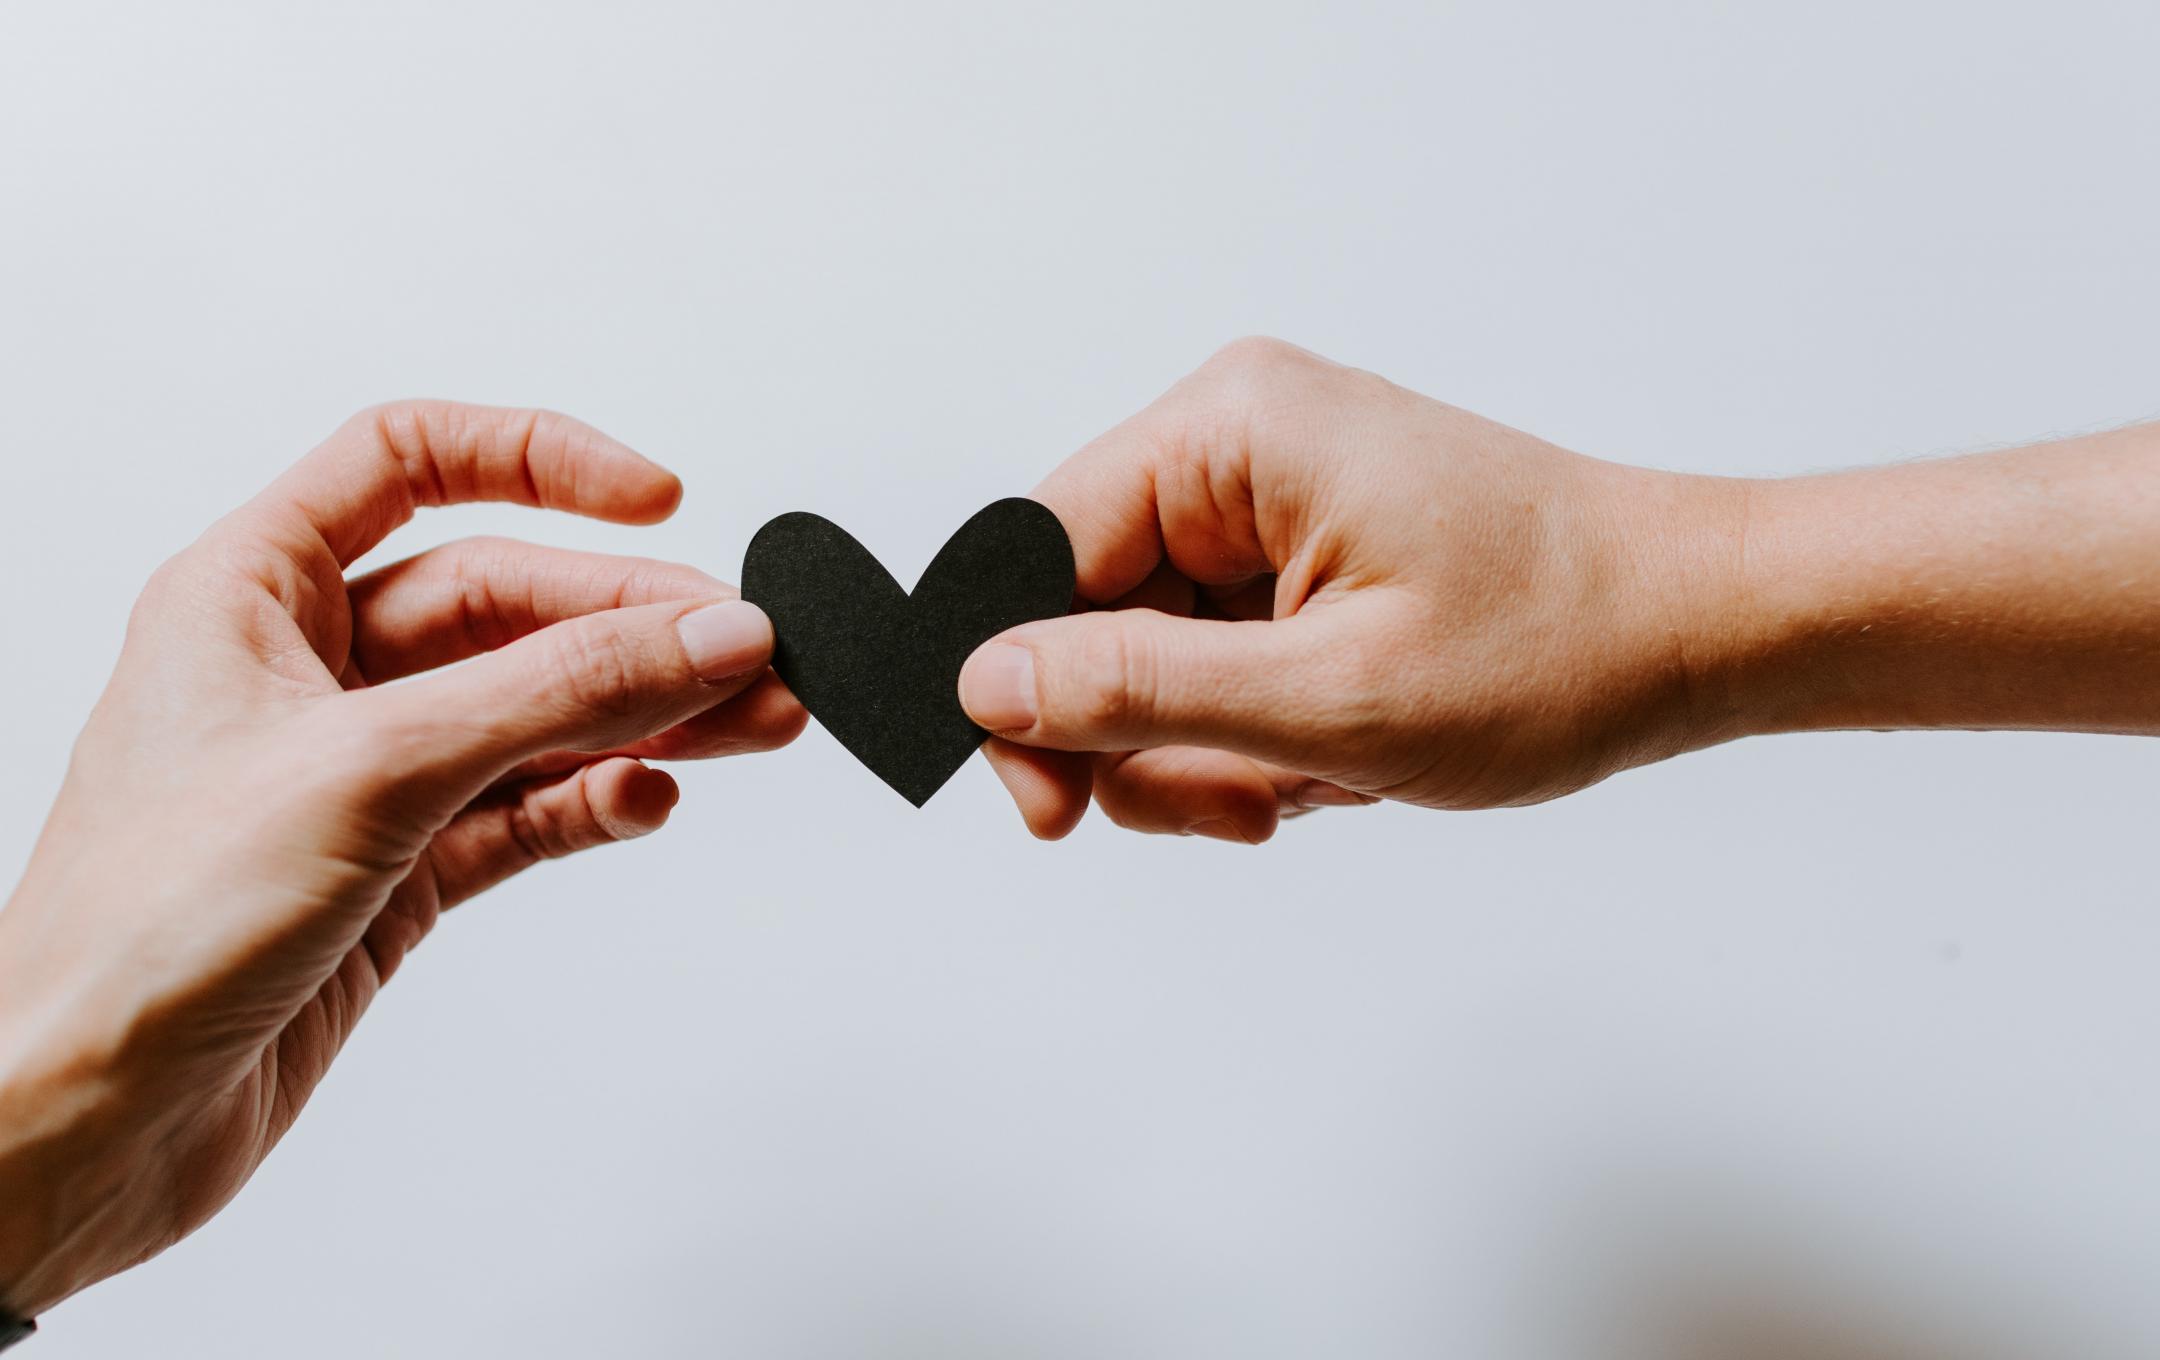 Two hands are gently holding a black paper heart in front of a white background